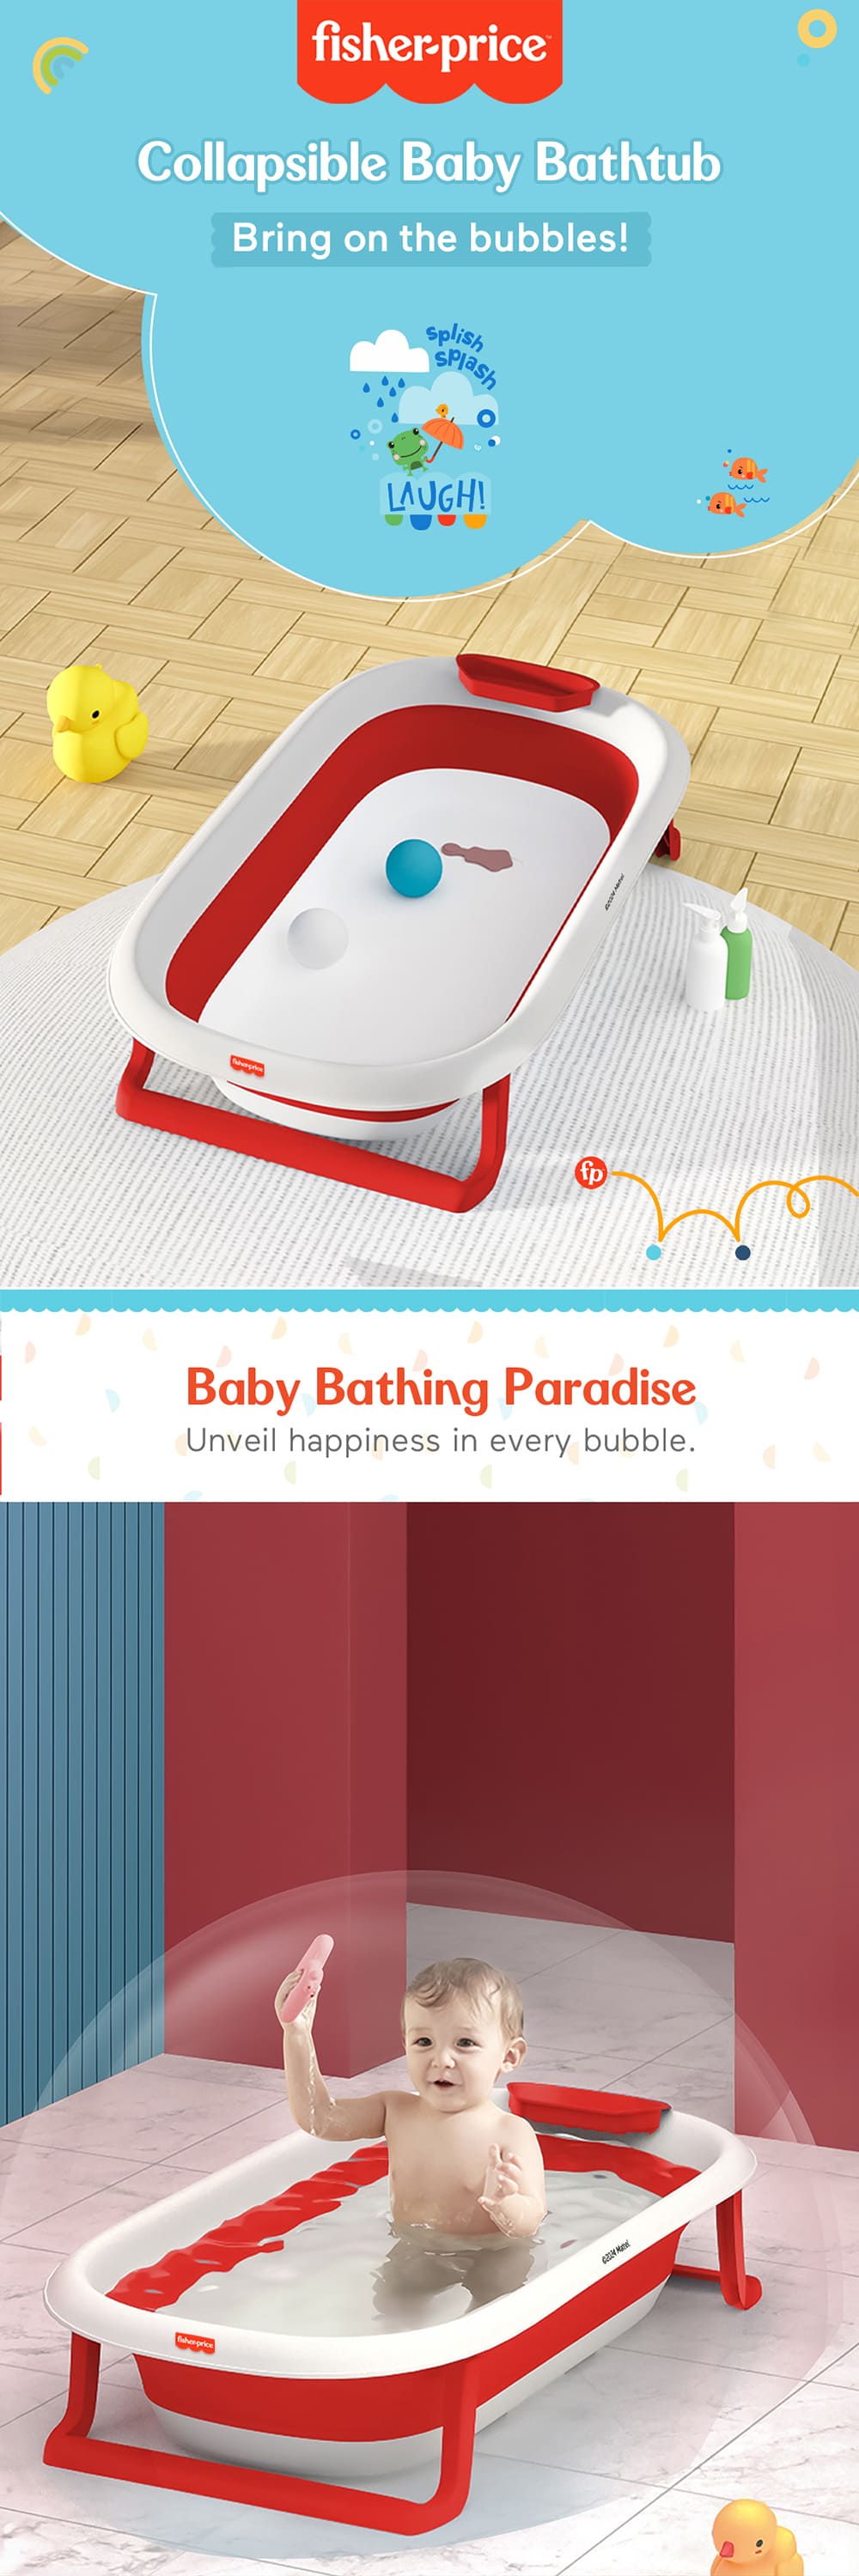 Collappsible Baby Bath Tub